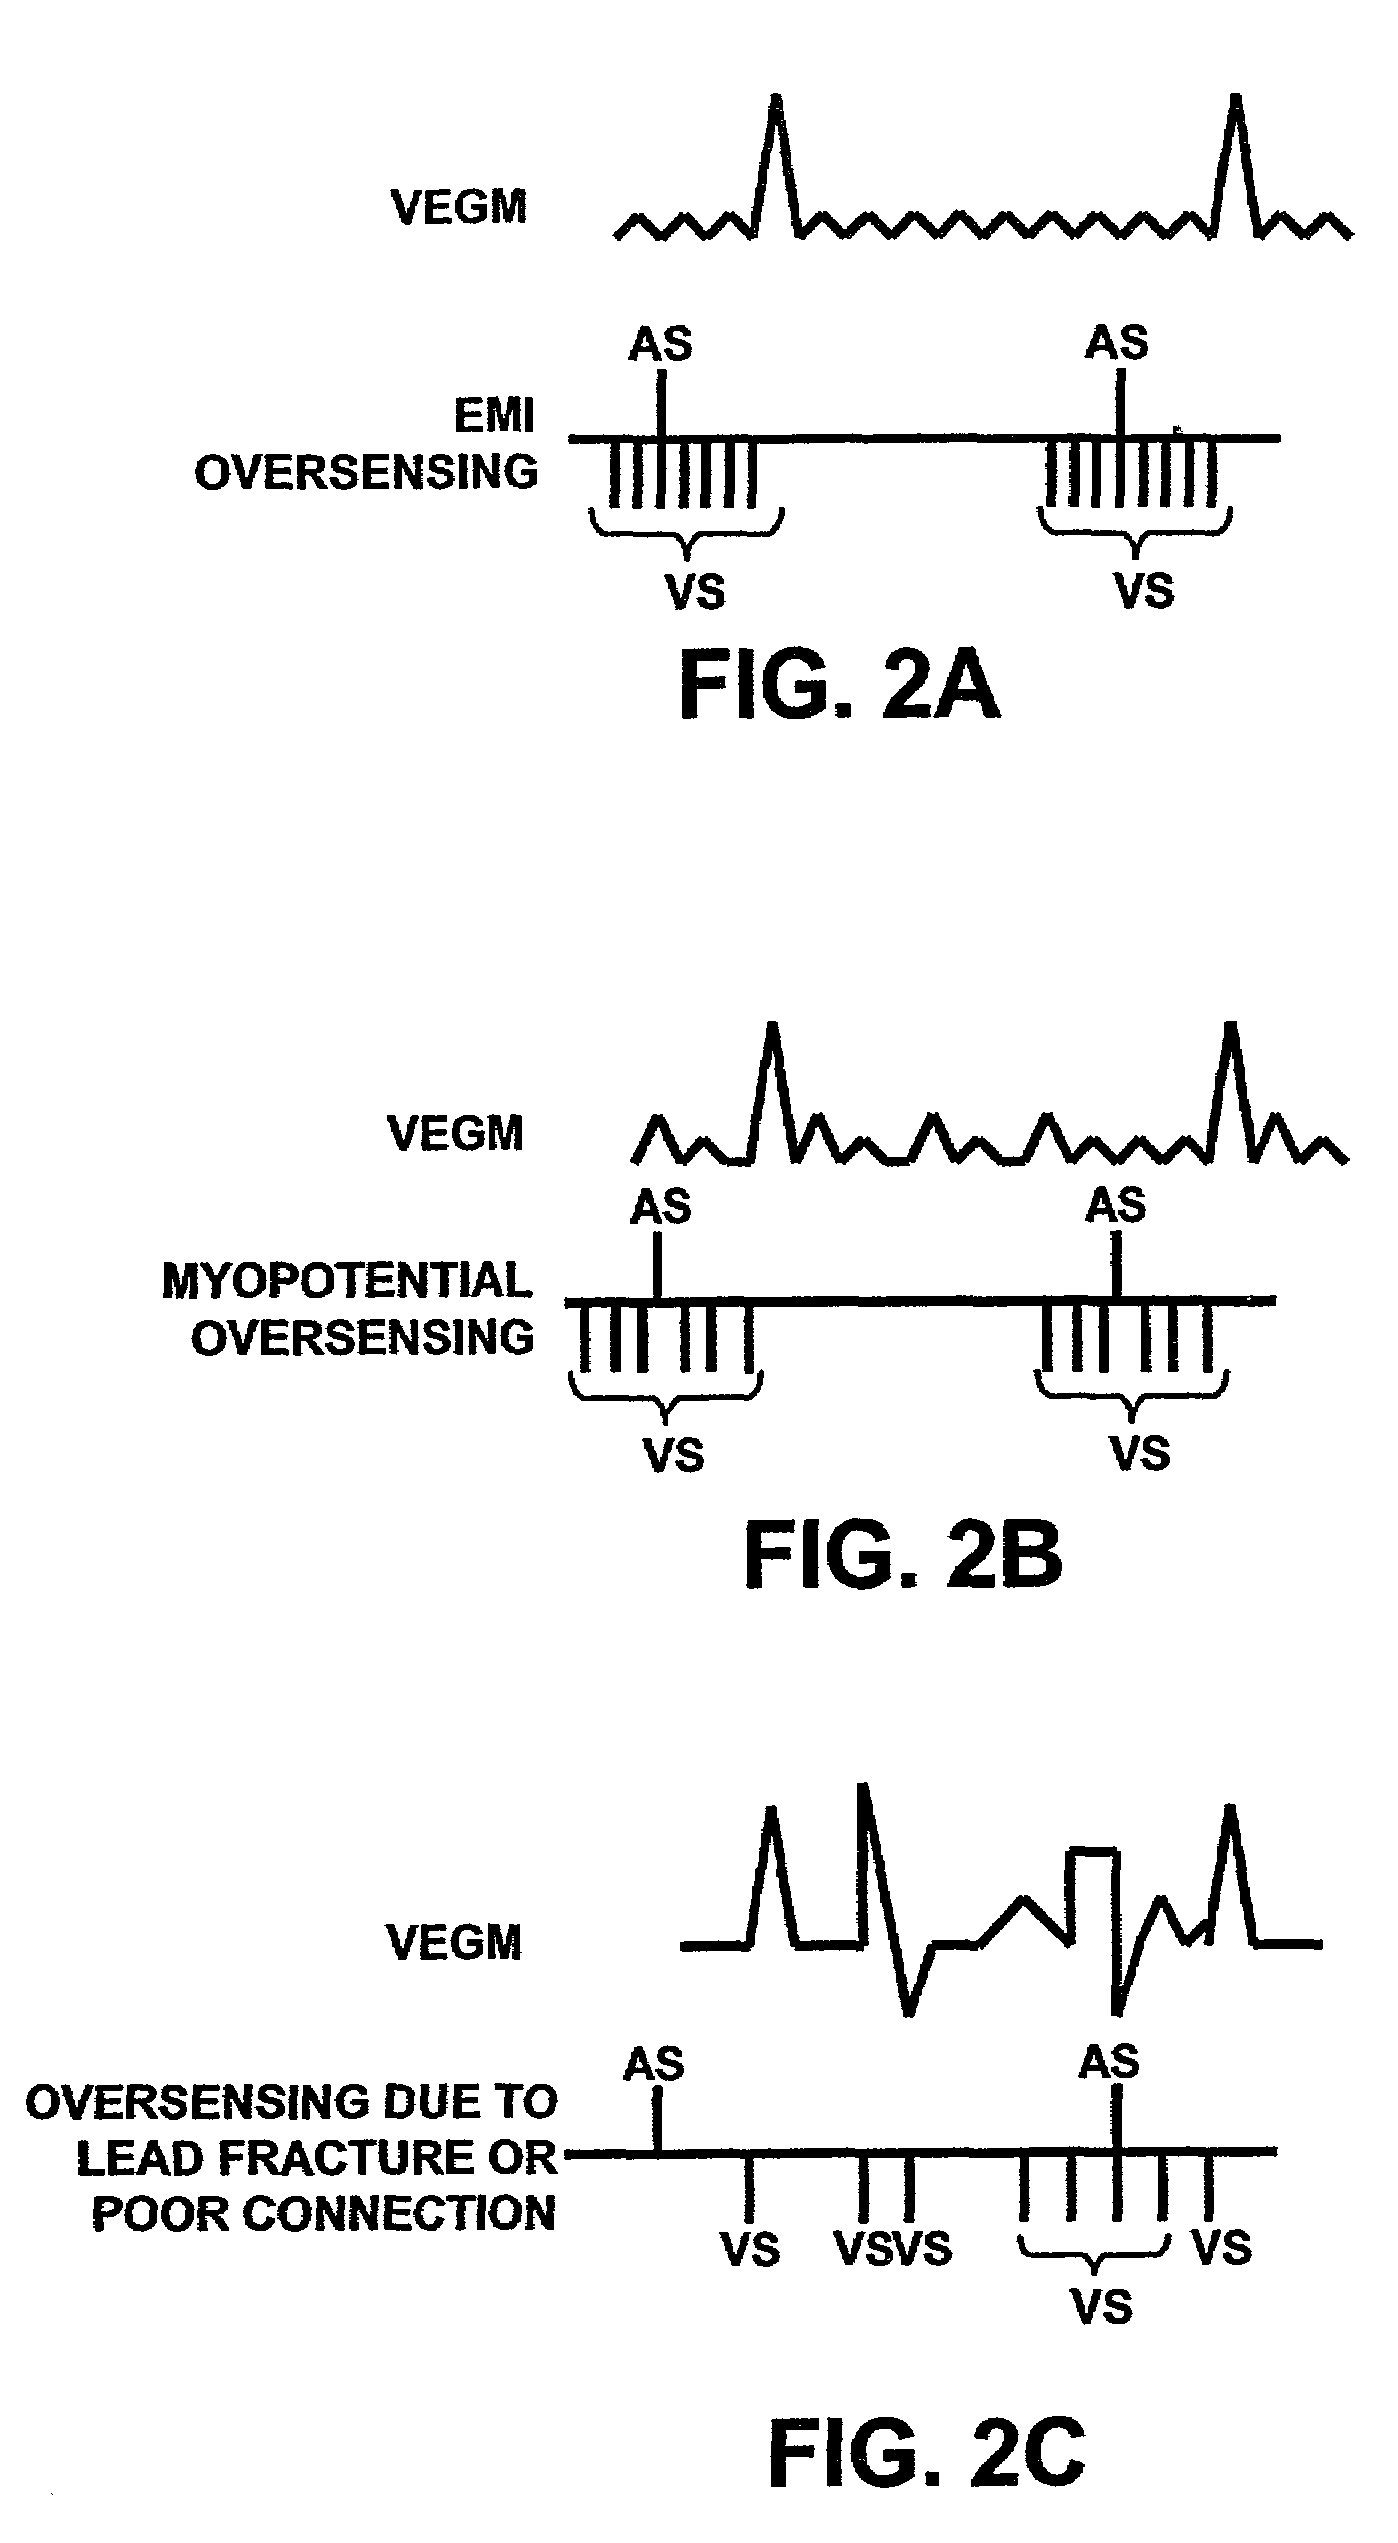 Method and apparatus for identifying cardiac and non-cardiac oversensing using intracardiac electrograms